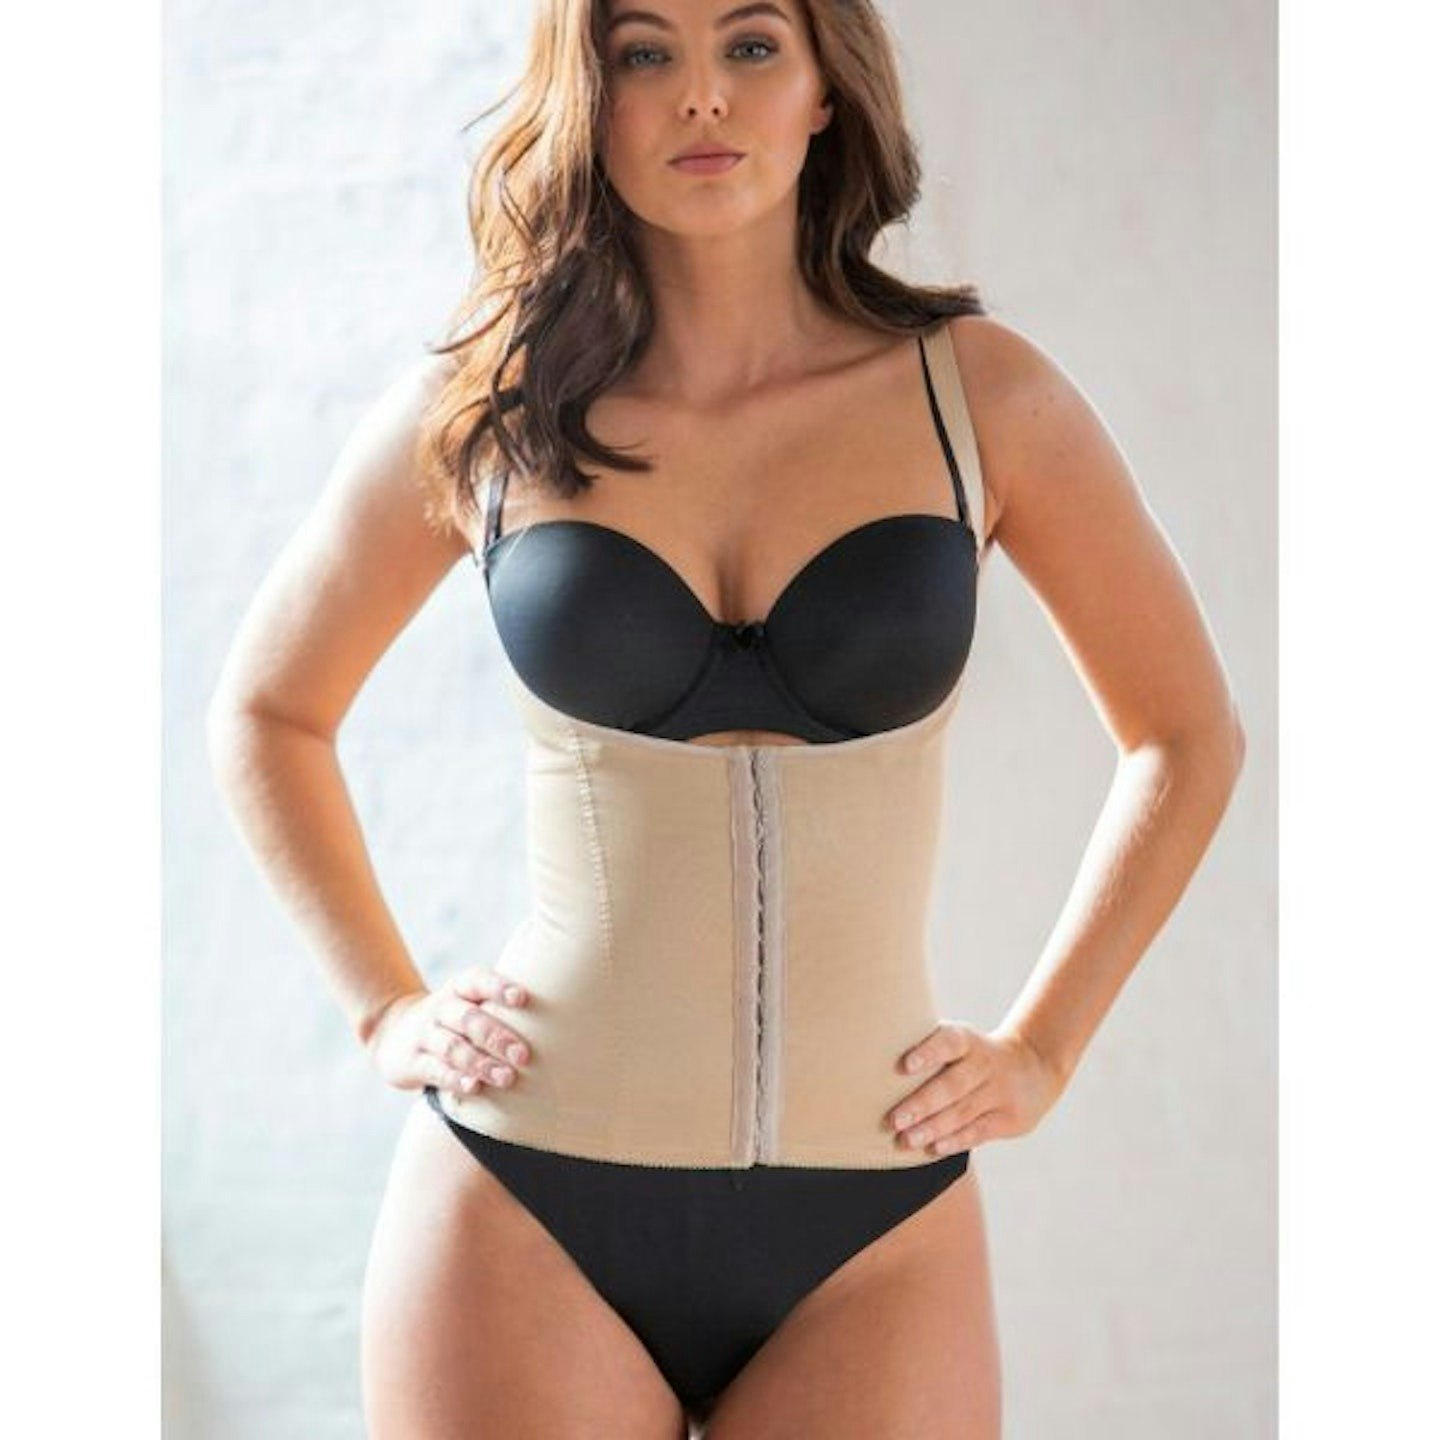 Hourglass Firm Tummy Control Back Smoothing Waist Cincher